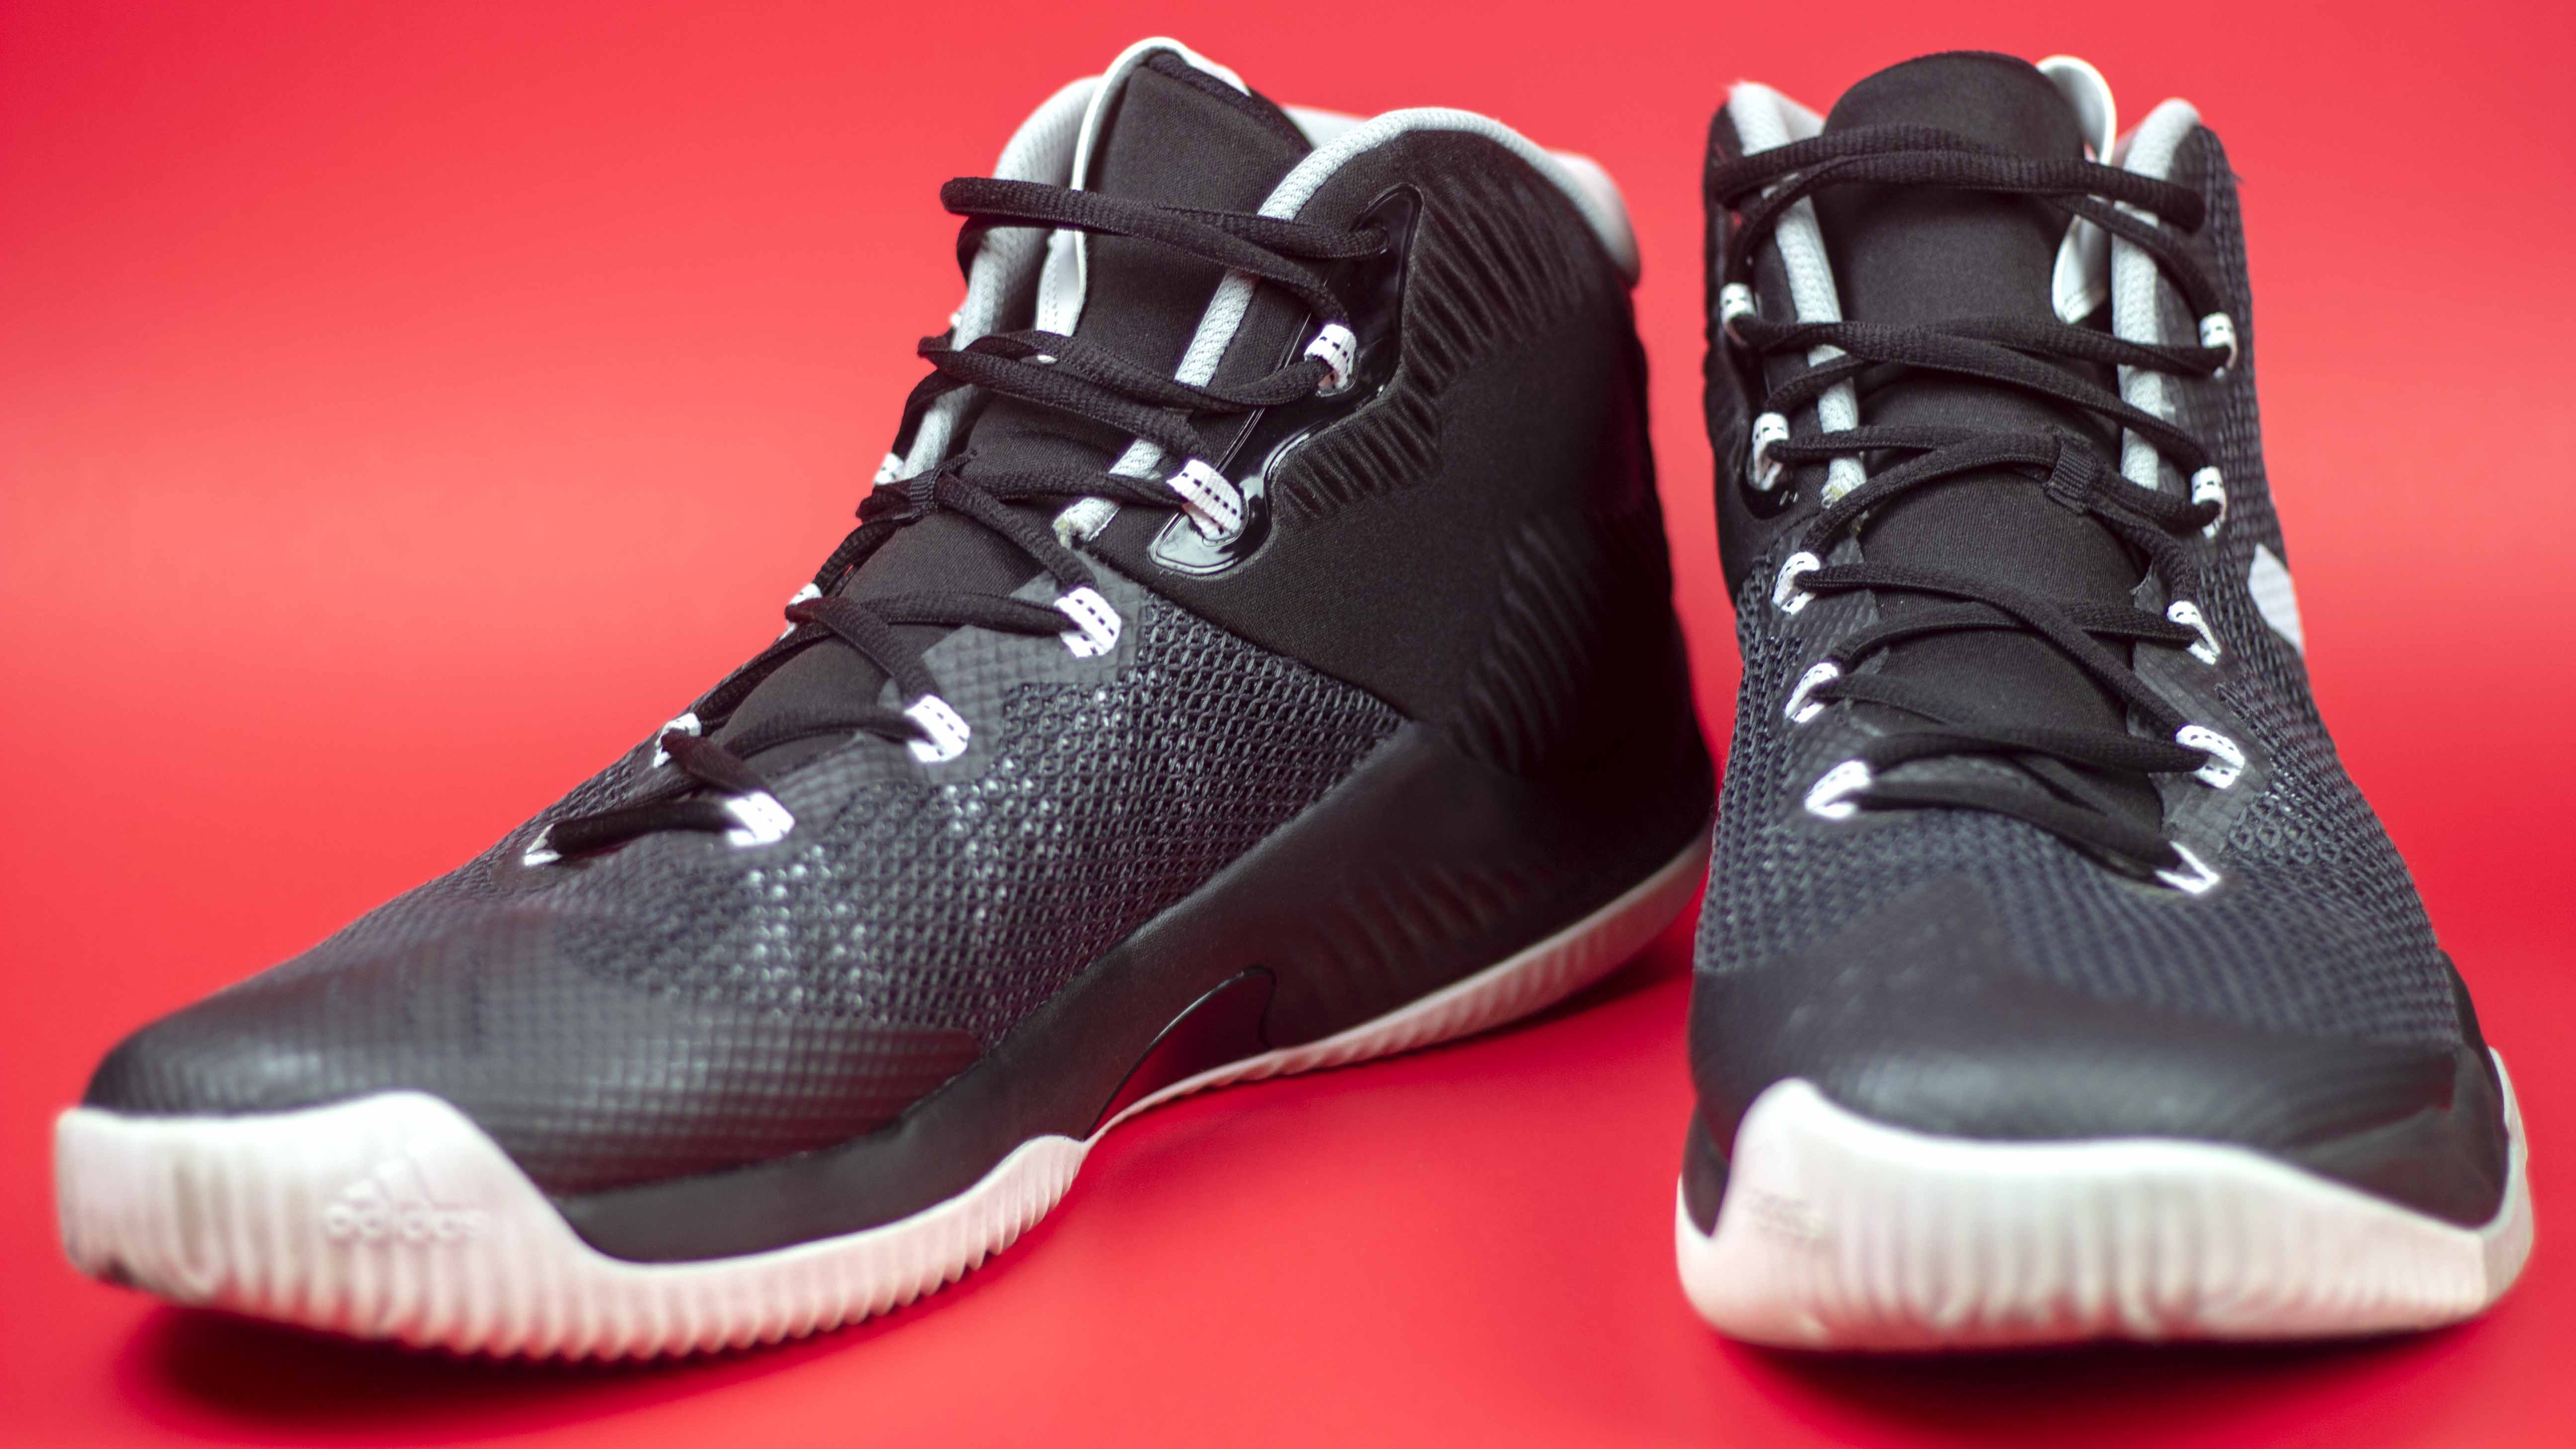 Buy Adidas Crazy Hustle - Only $61 Today | RunRepeat